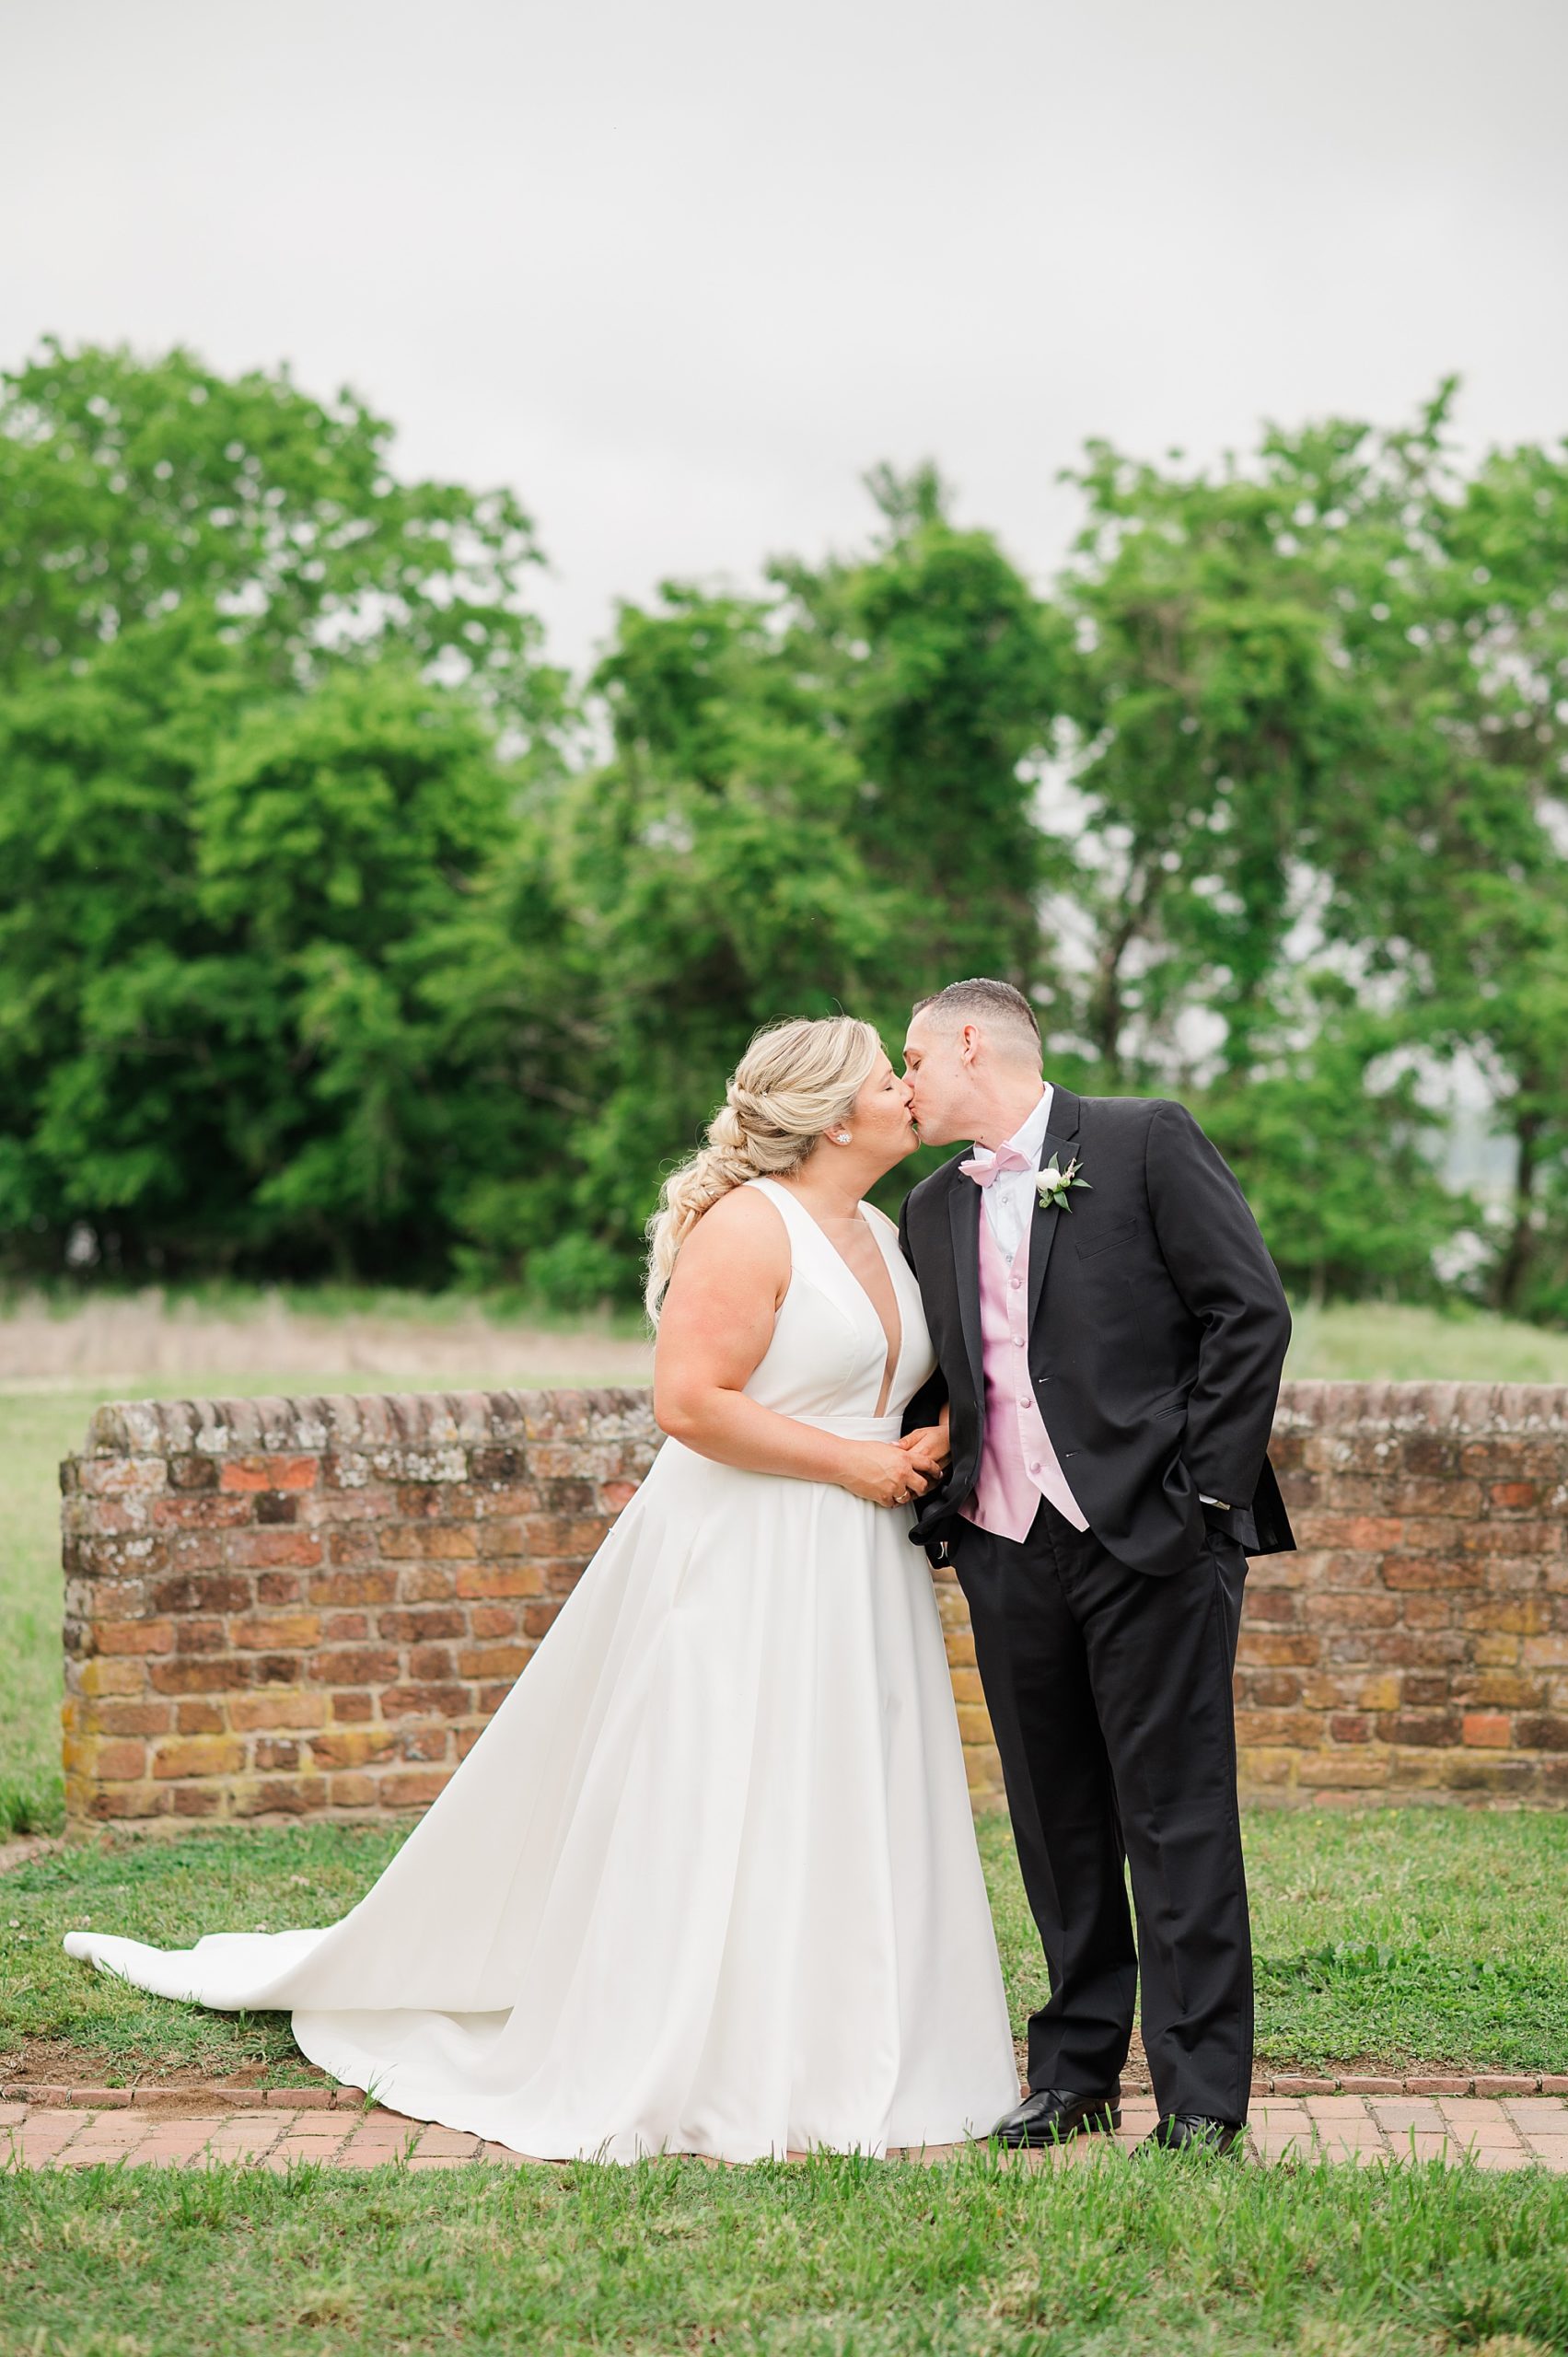 Bride and Groom First Look at Spring Cousiac Manor Wedding. Wedding Photography by Kailey Brianne Photography